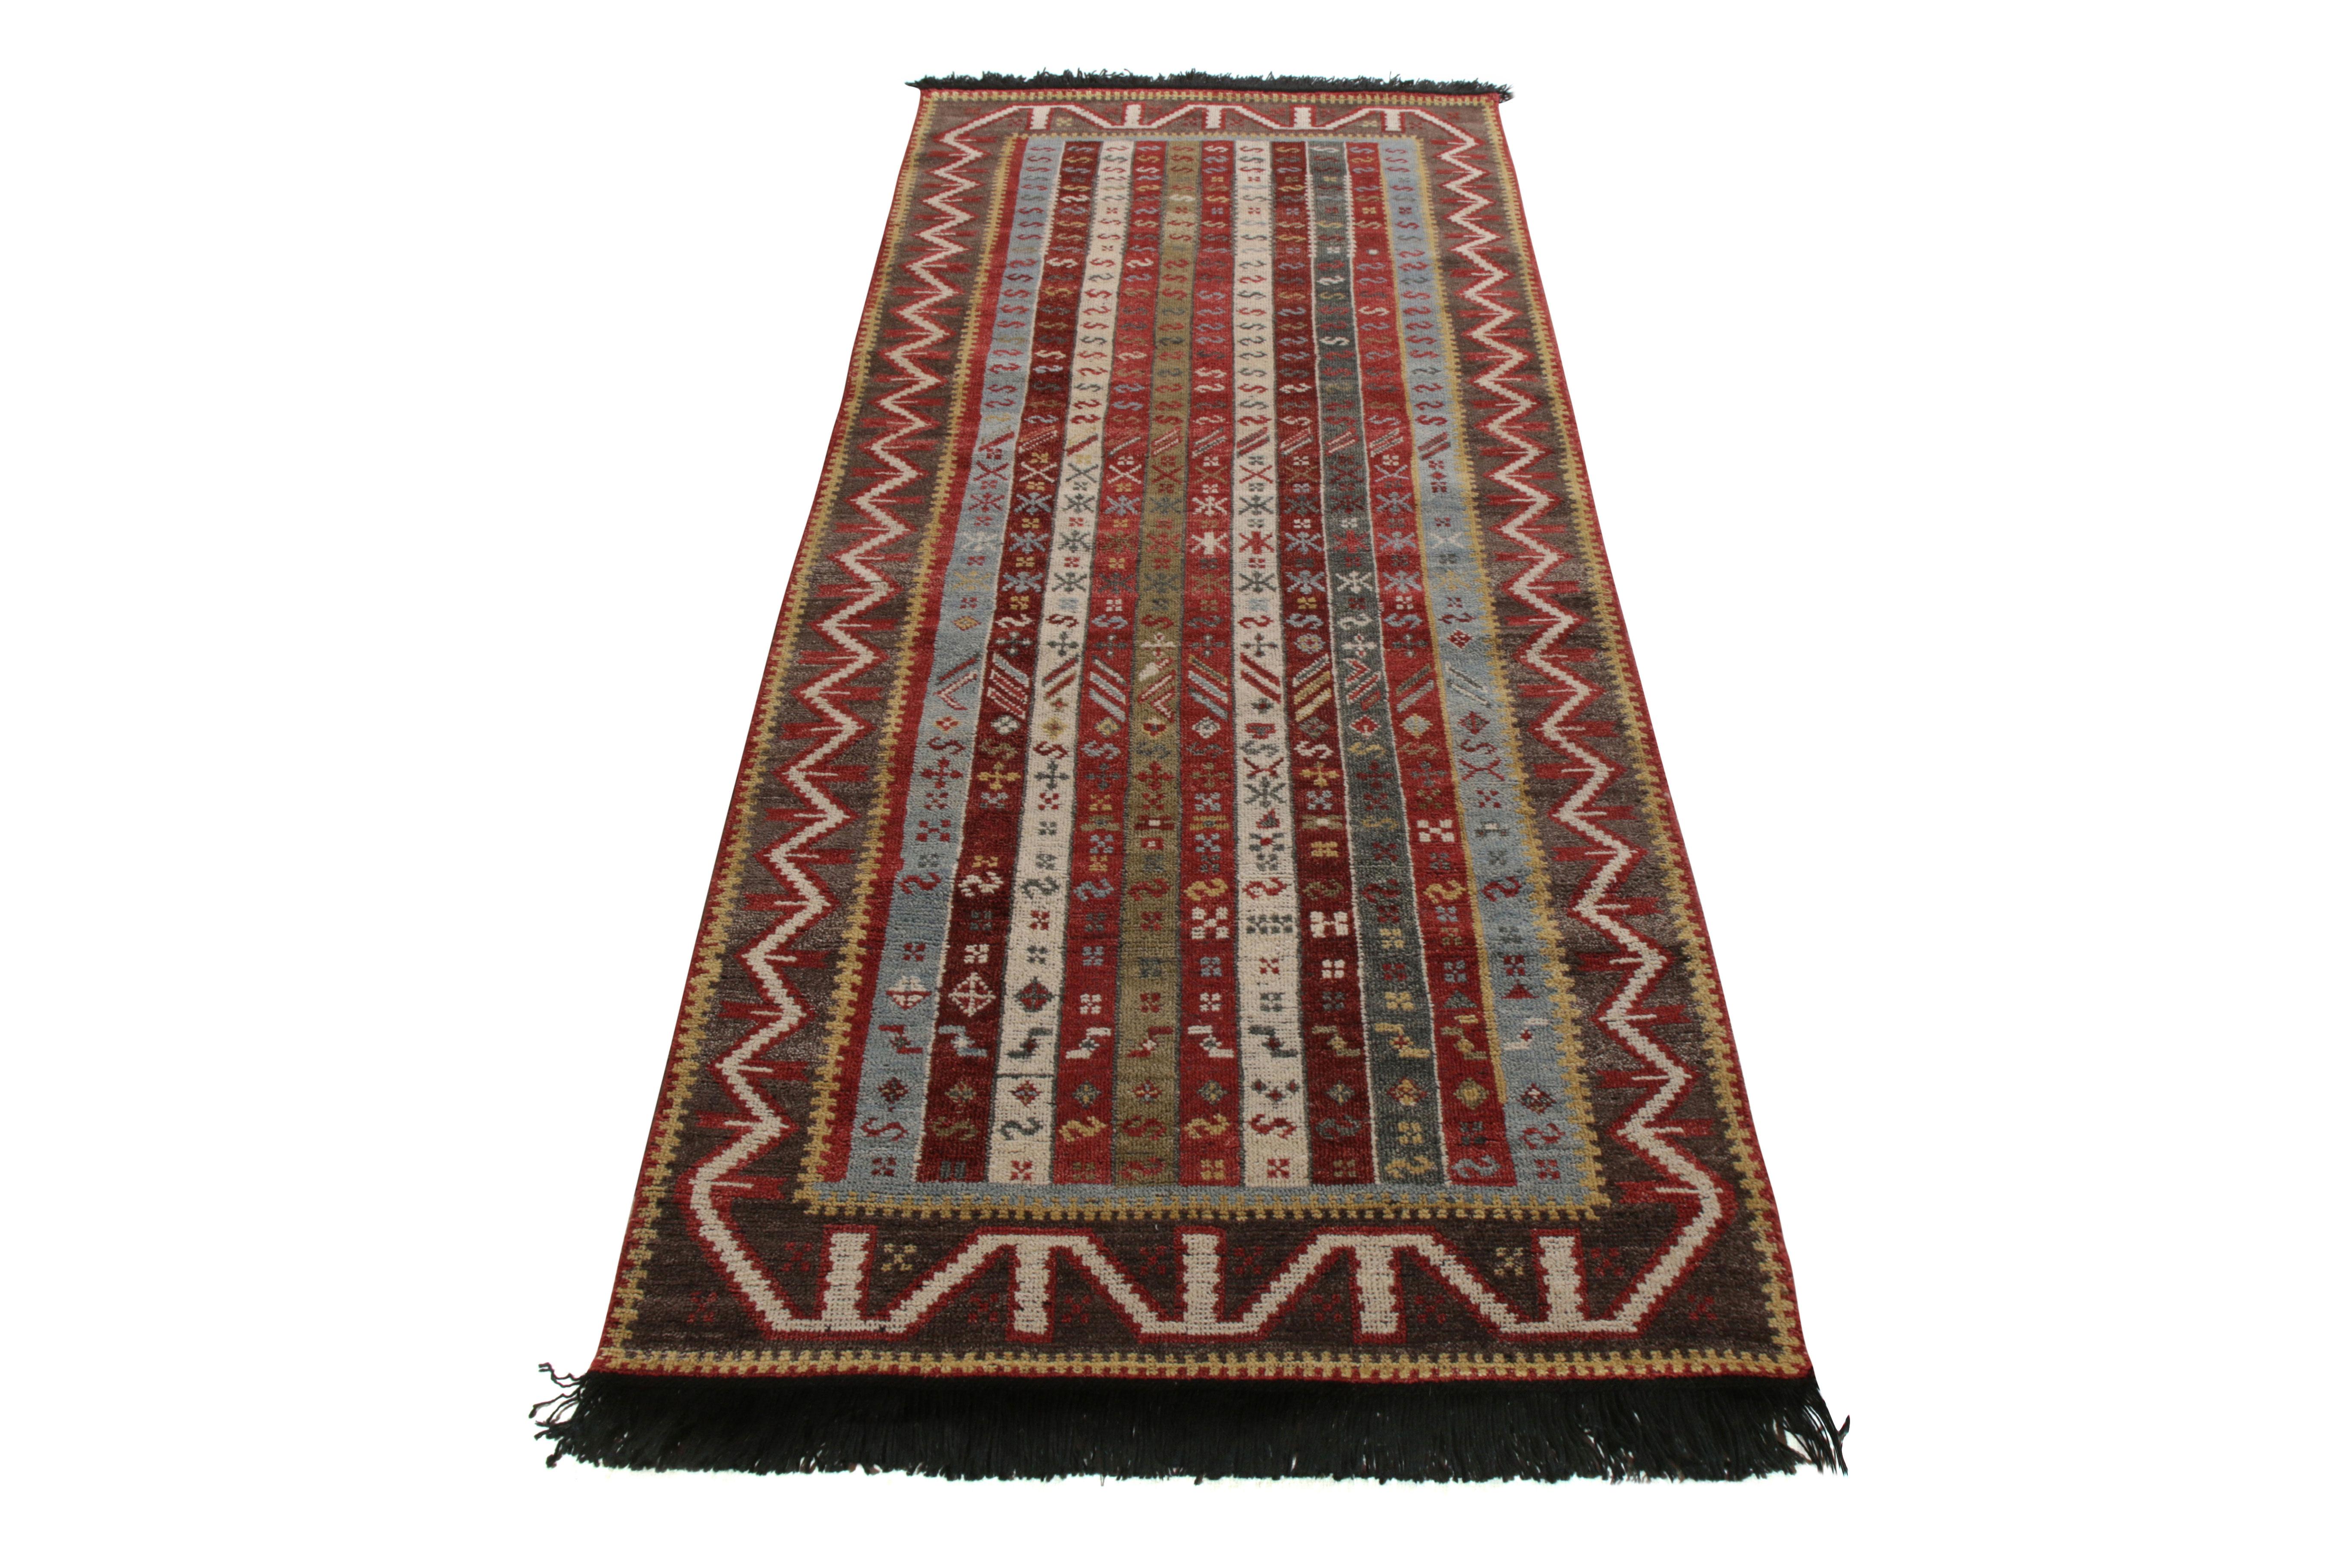 A 3 x 8 runner inspired by celebrated tribal rug styles, from Rug & Kilim’s Burano Collection. Hand knotted in notably soft Ghazni wool, enjoying red and blue with rich and lively accents in stripes and varied motifs. The intriguing take on